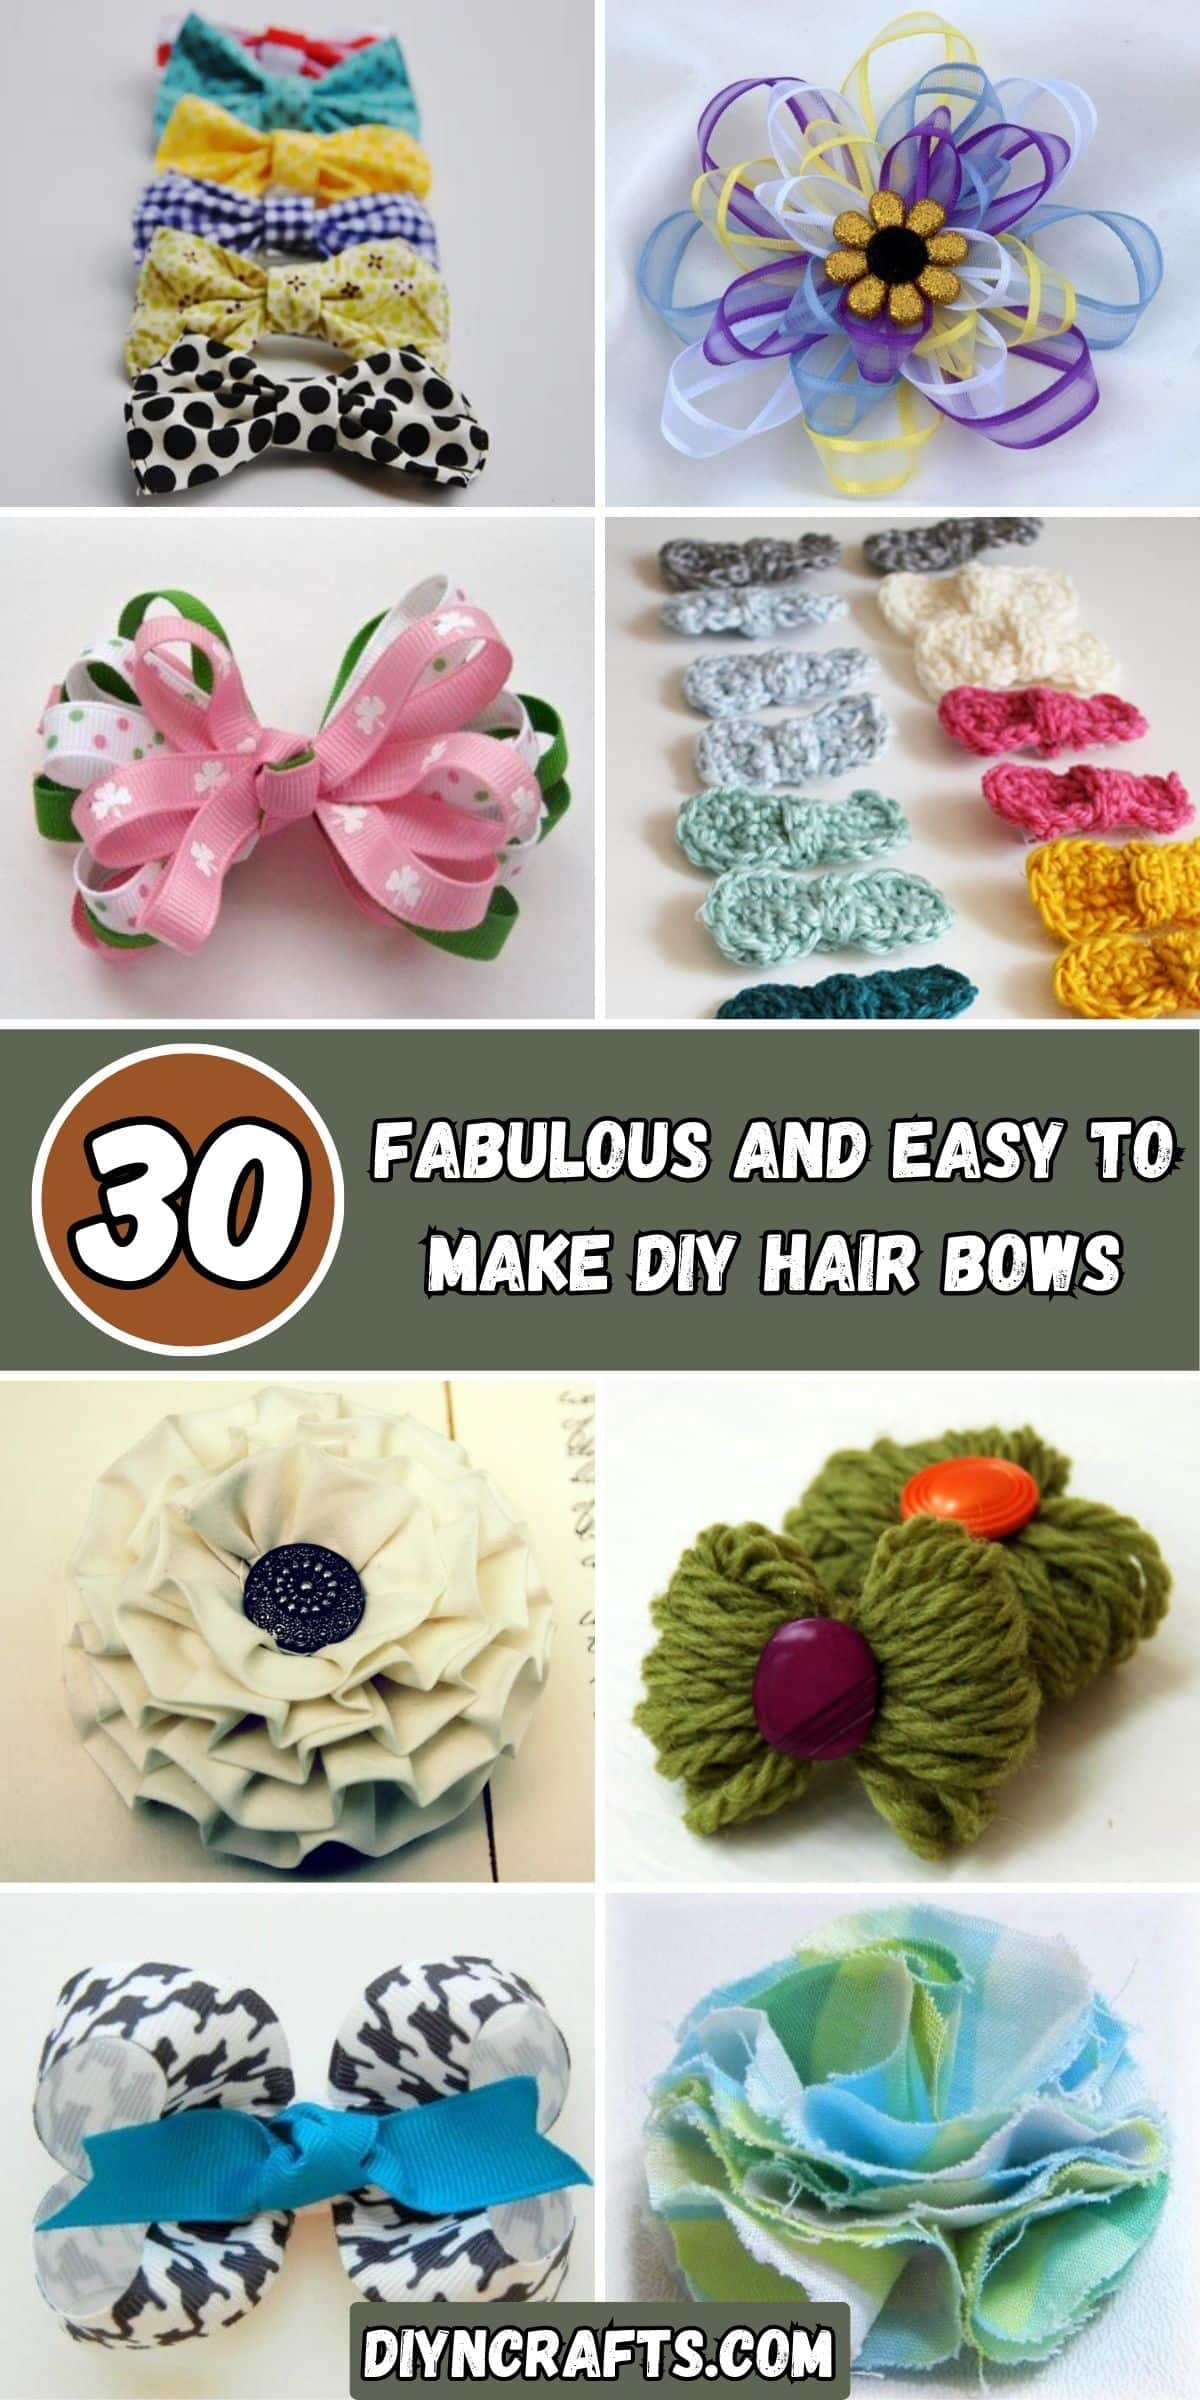 30 Fabulous and Easy to Make DIY Hair Bows collage.